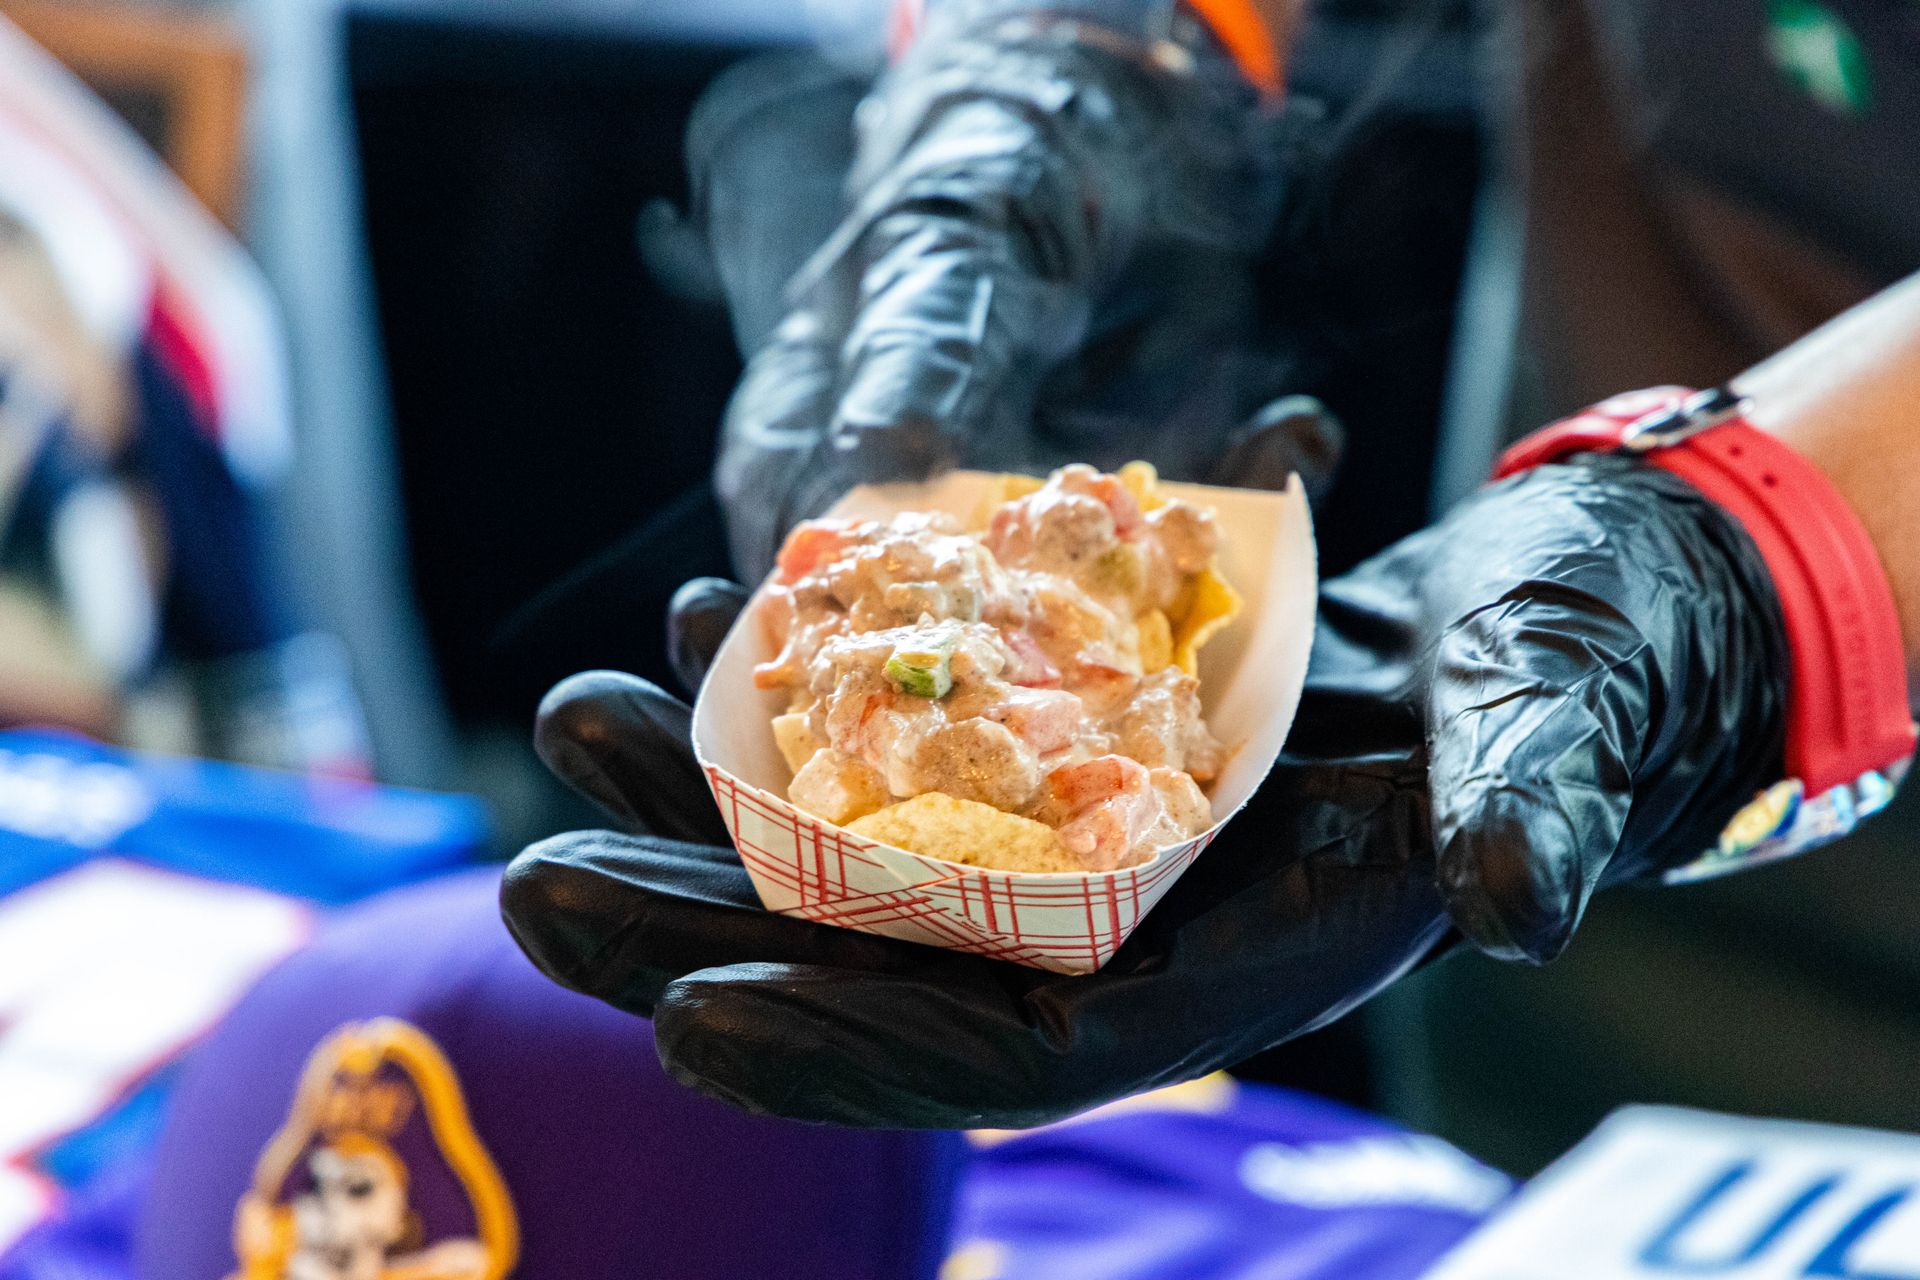 a person wearing black gloves is holding a container of food in their hand .